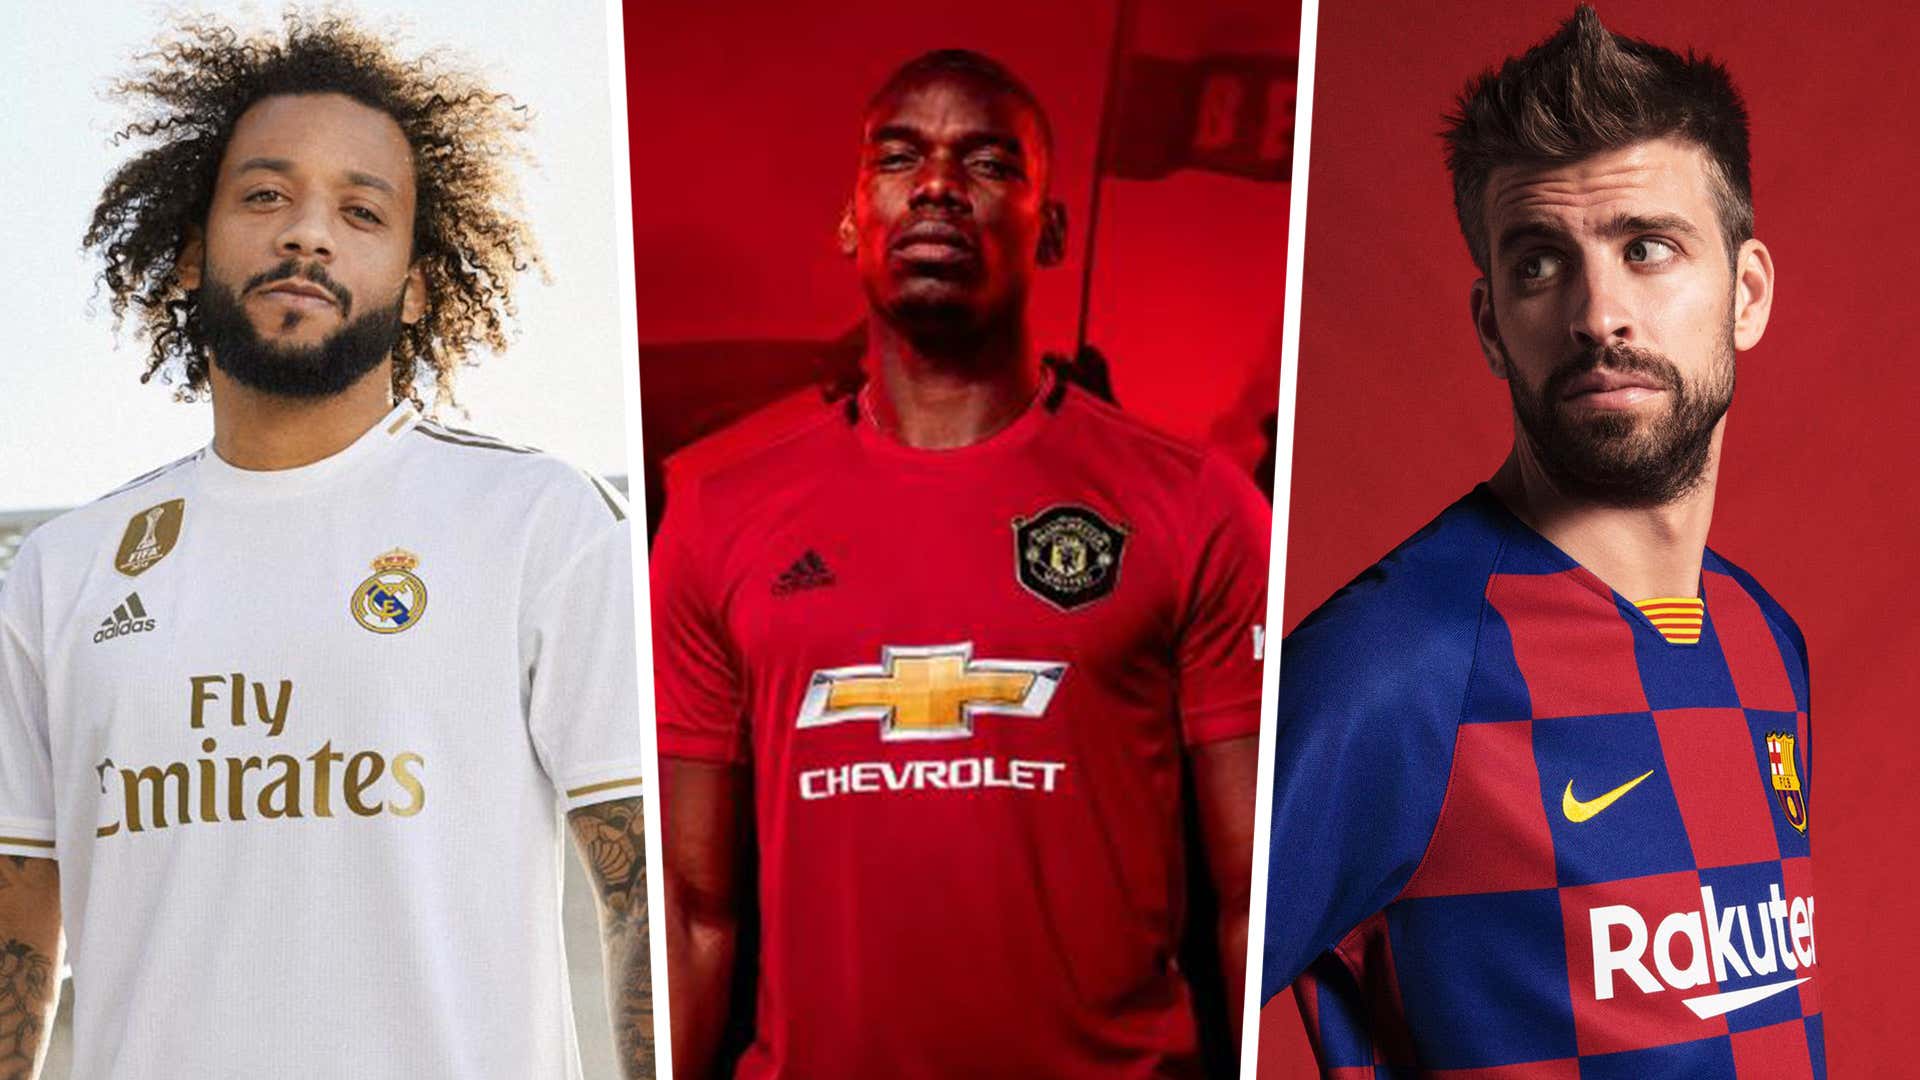 New 2019 20 Football Kits Real Madrid Manchester United Barcelona And All The Top Clubs Shirts